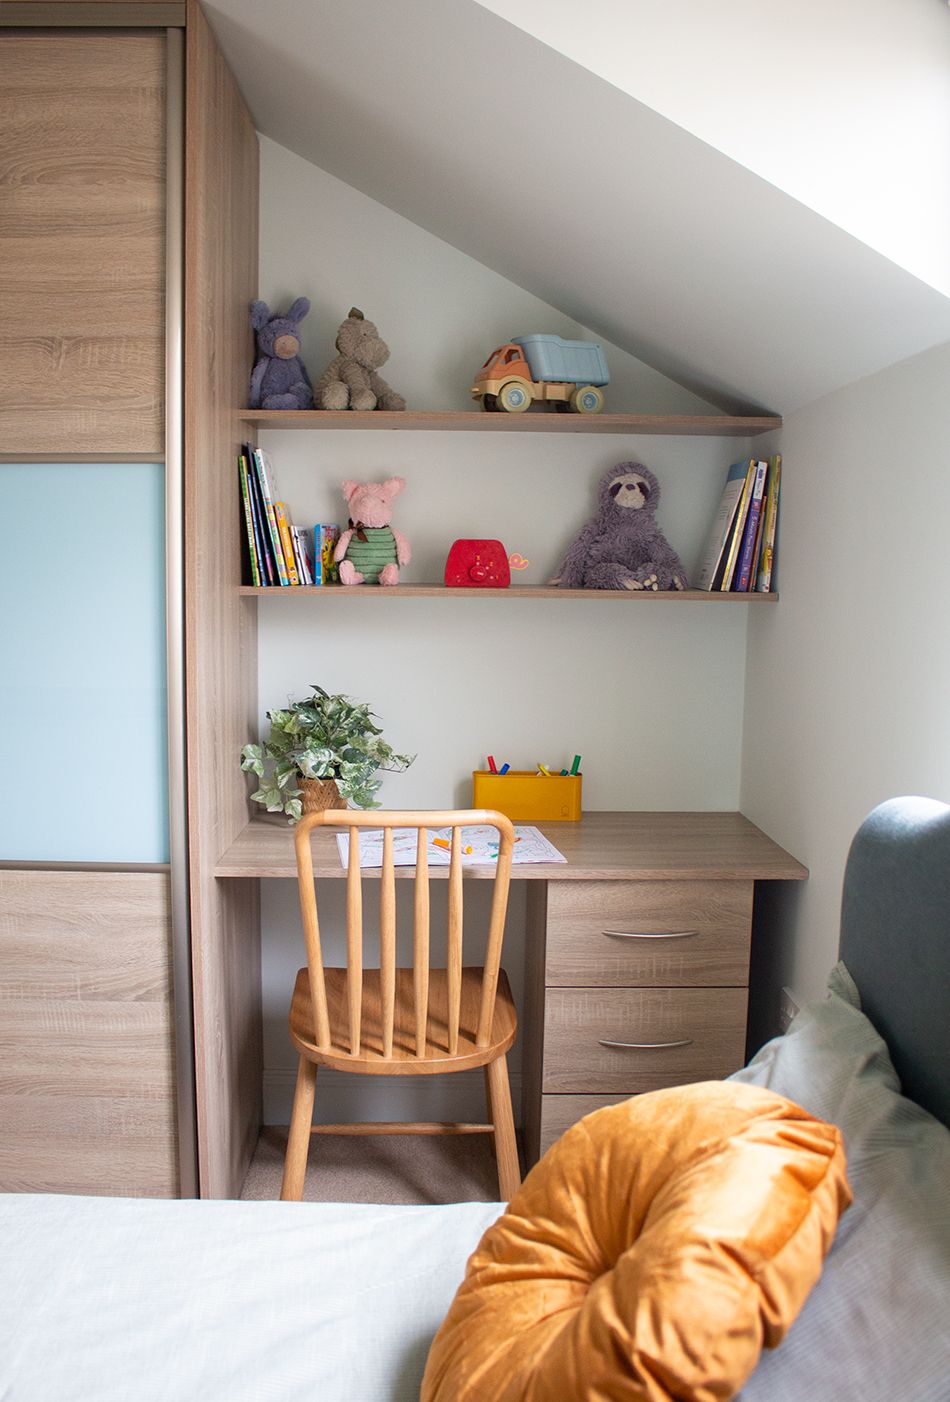 A close up photo of a child's bedroom desk and shelving.